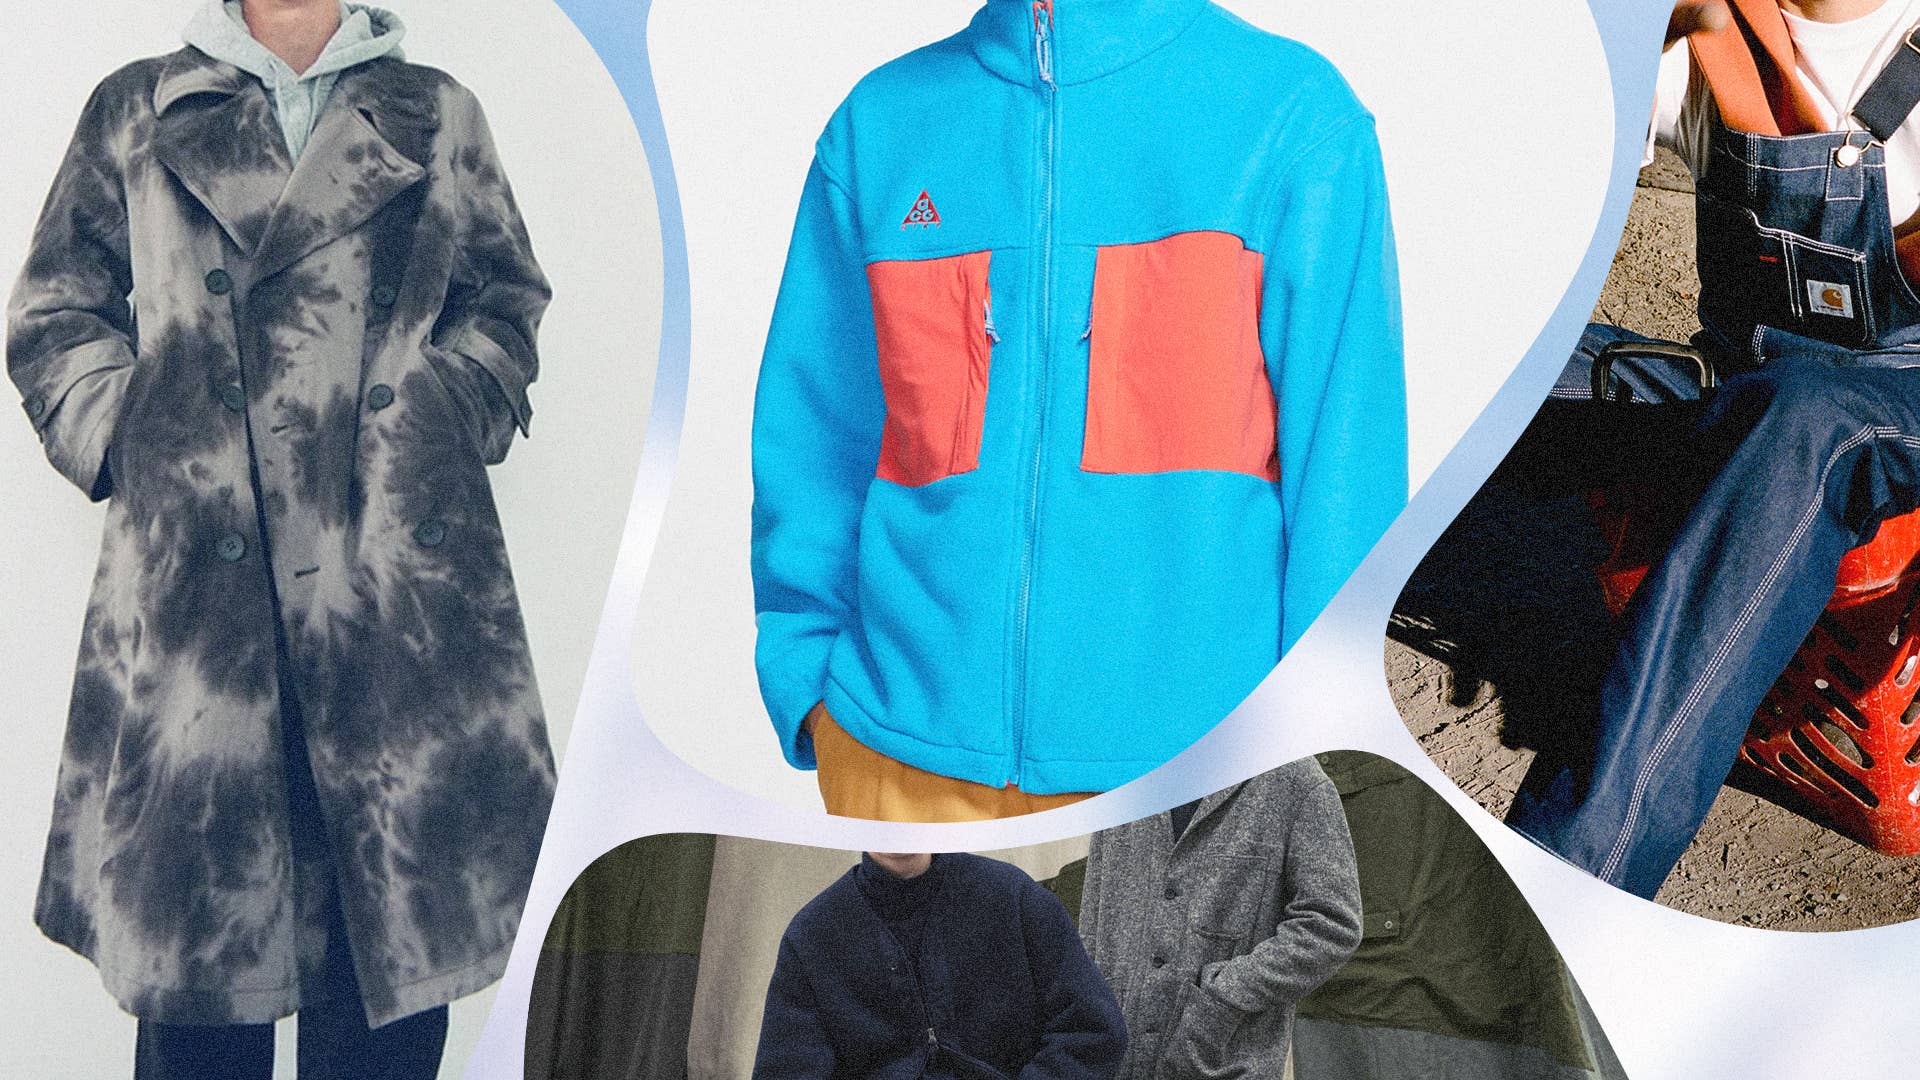 Menswear Fiends Pay Thousands for After-Hood Sweatshirts. We Found